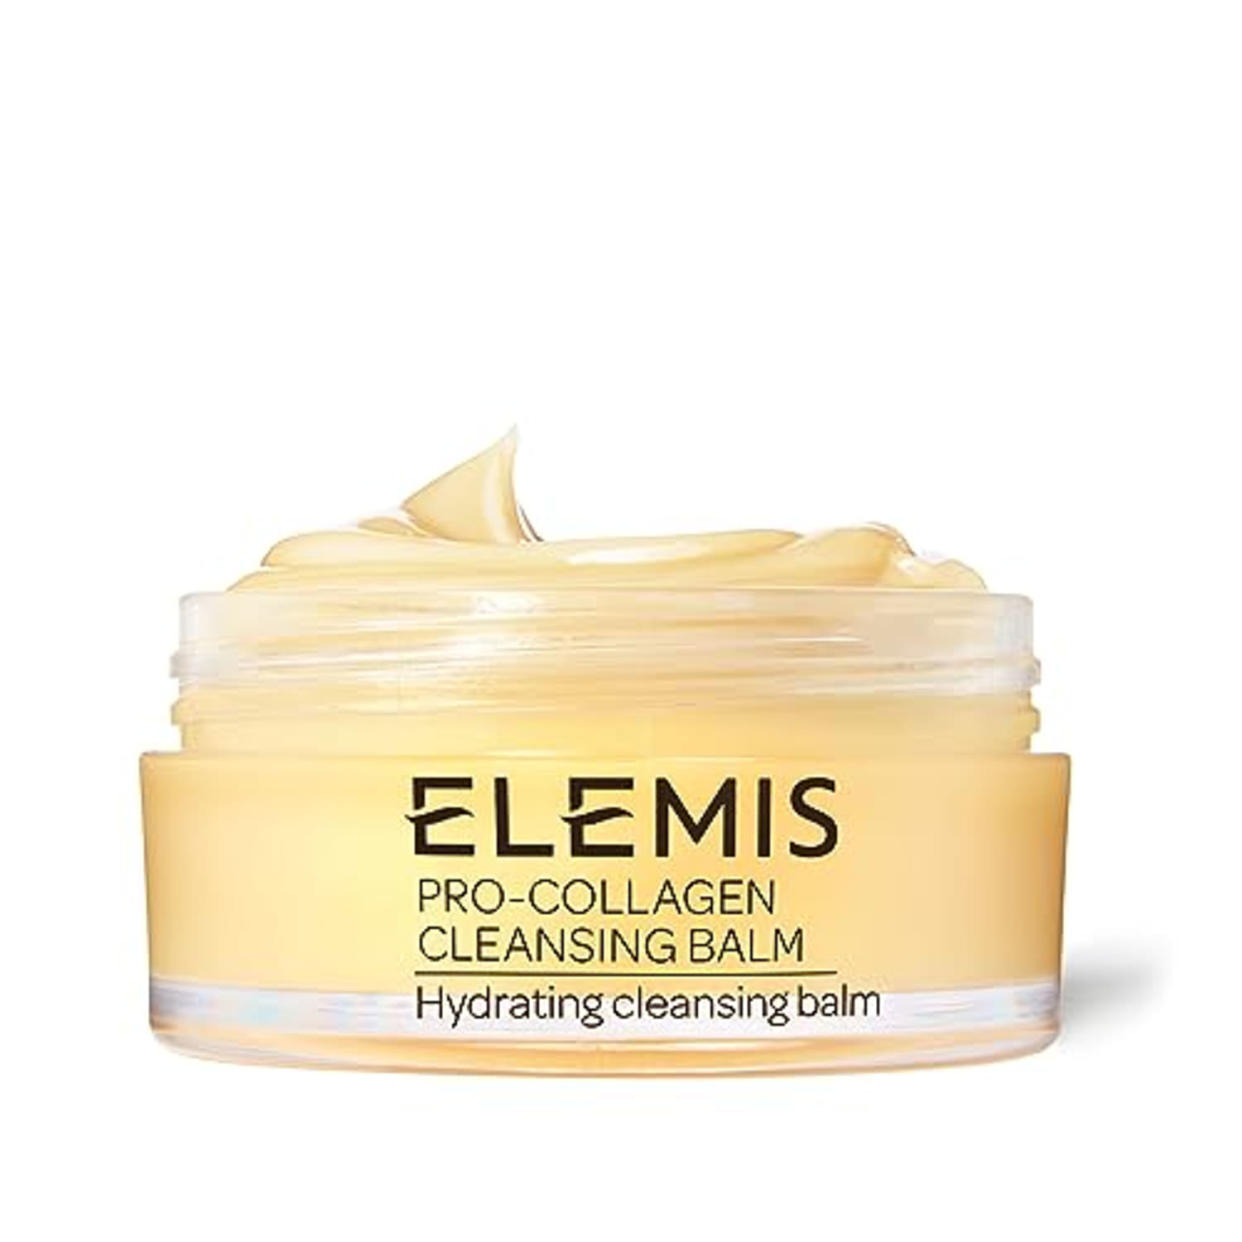 ELEMIS Pro-Collagen Cleansing , Ultra Nourishing Treatment Balm + Facial Mask Deeply Cleanses, Soothes, Calms & Removes Makeup and Impurities (AMAZON)